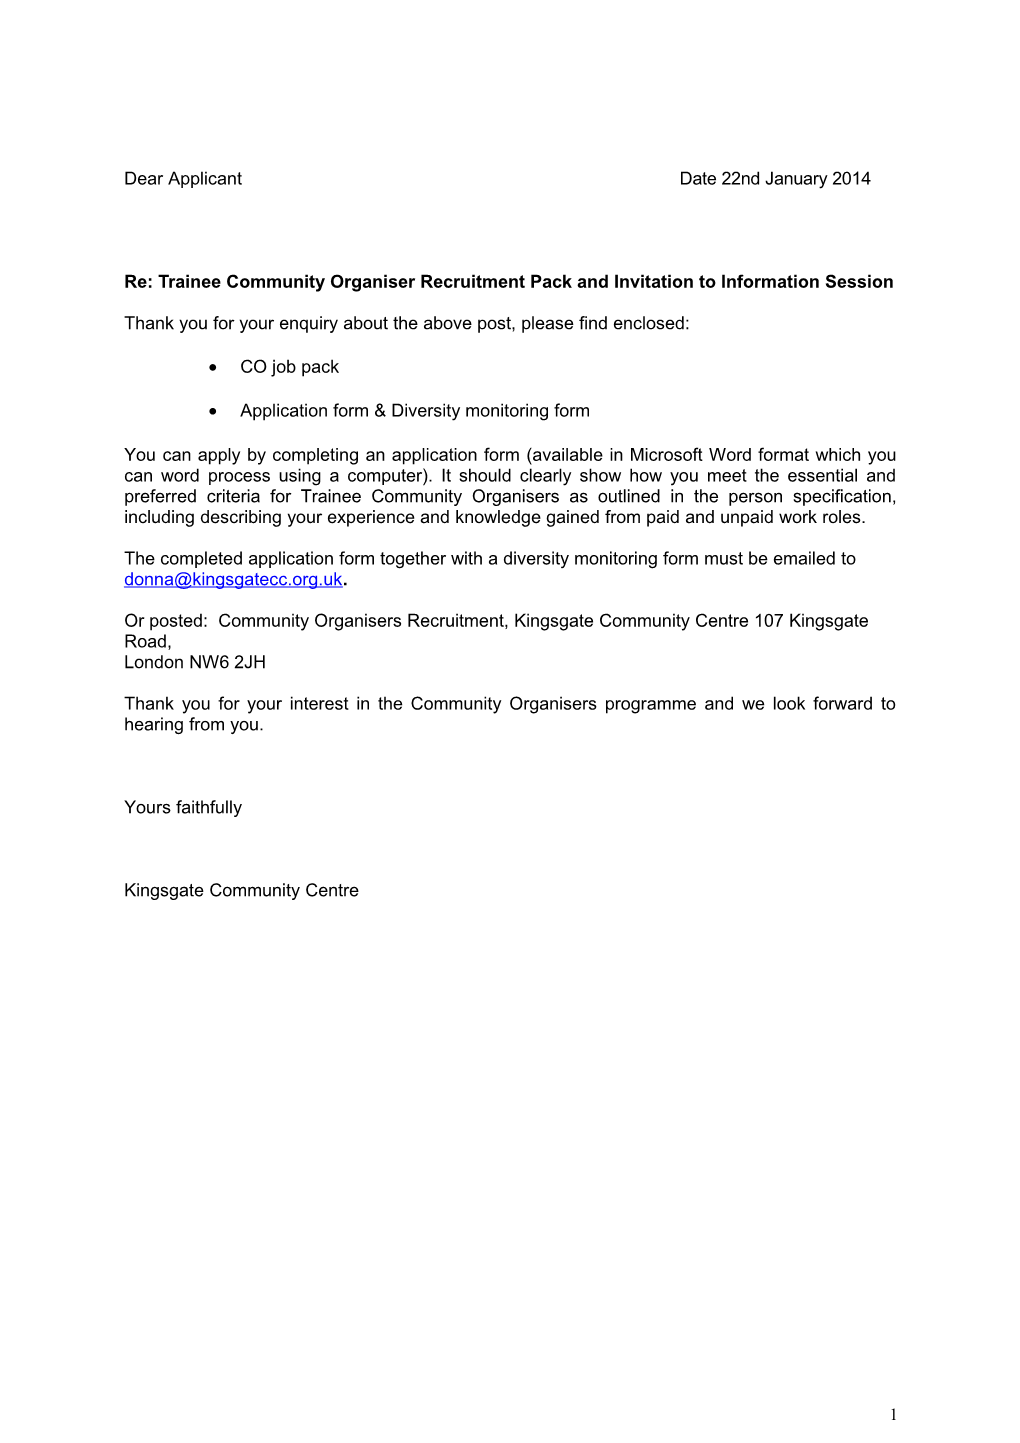 Re: Trainee Community Organiser Recruitment Pack and Invitation to Information Session